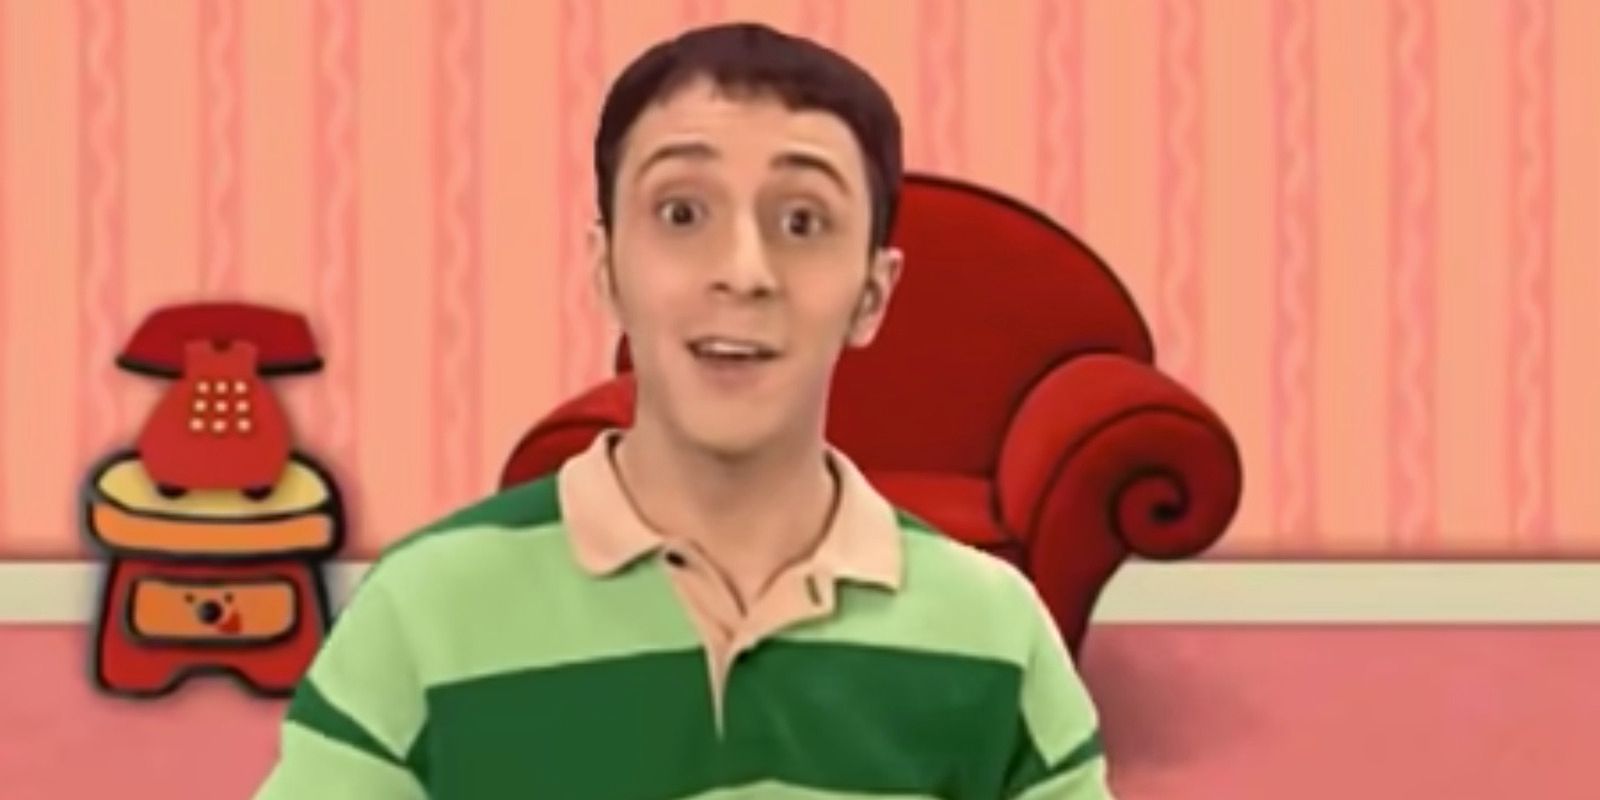 Steve from 'Blue's Clues' is back, and he's lost his hair - wide 2